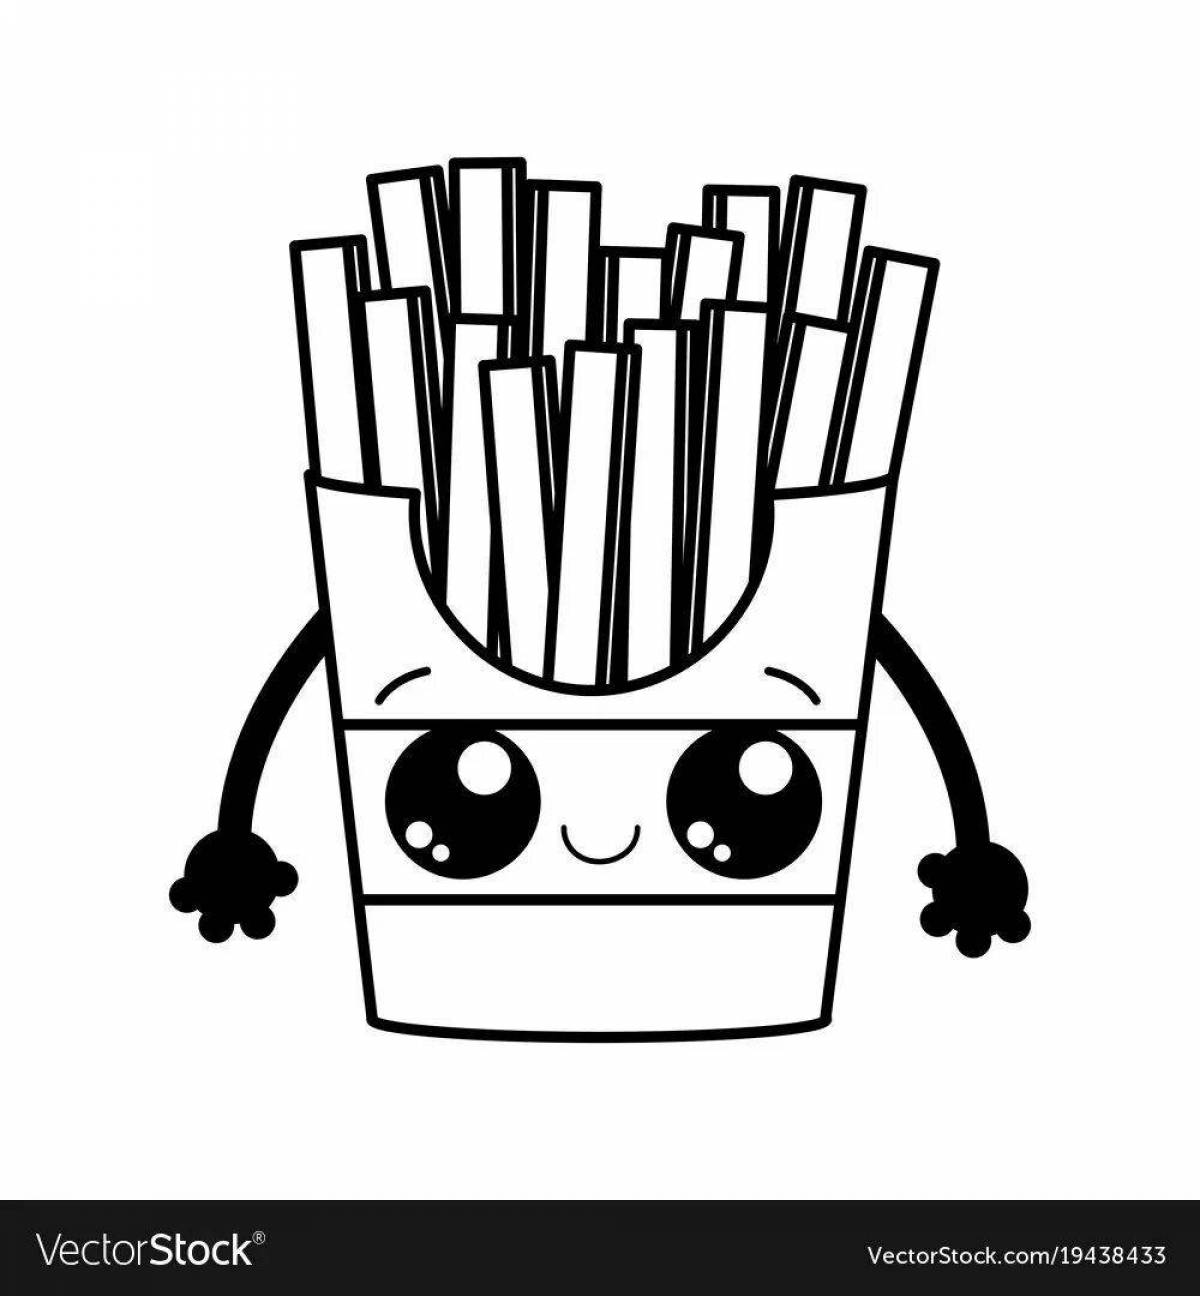 Fun coloring book with french fries for kids